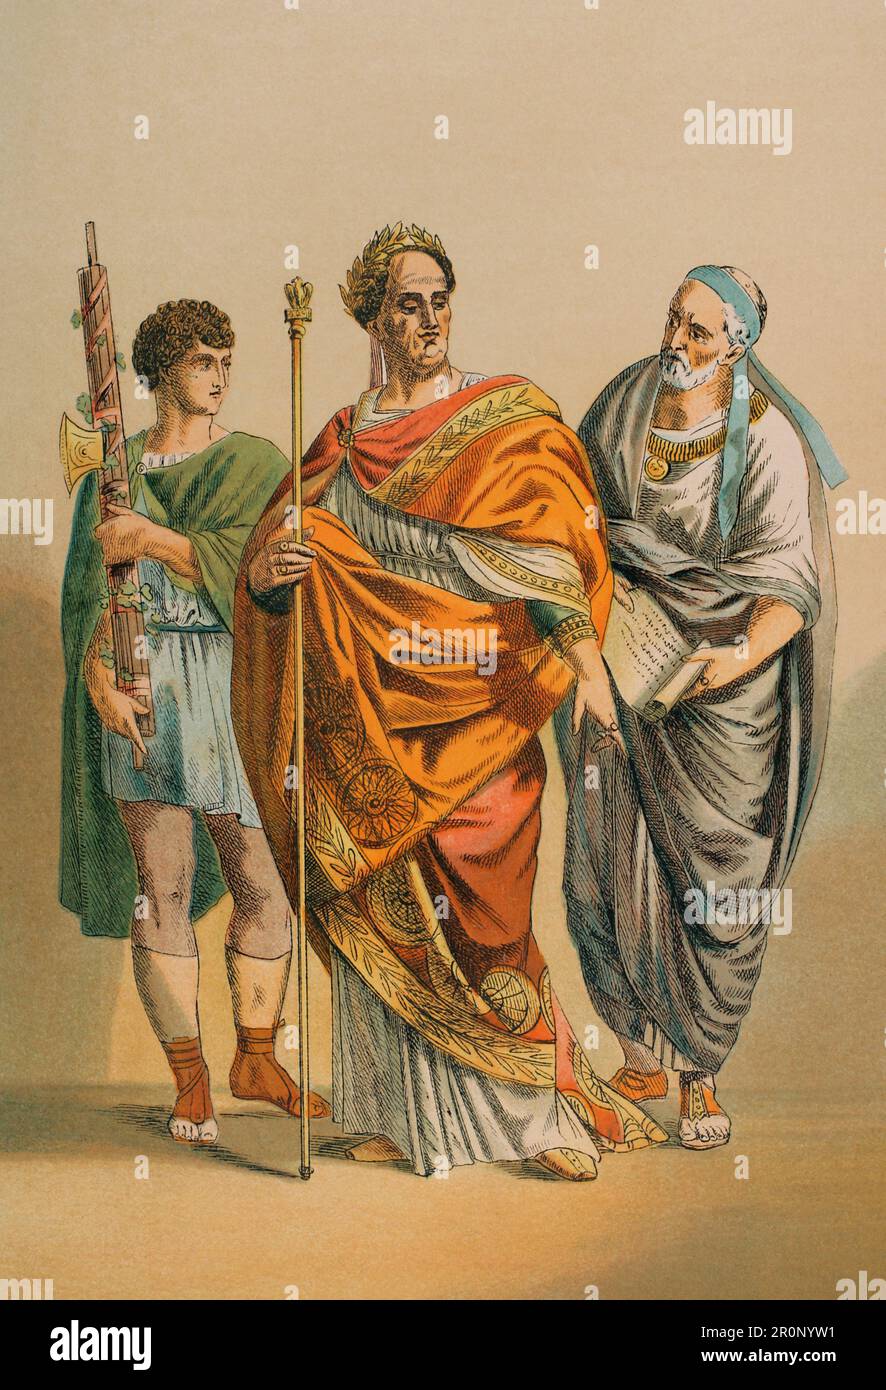 Ancient Rome. Flamen and his assistants. Chromolithography. 